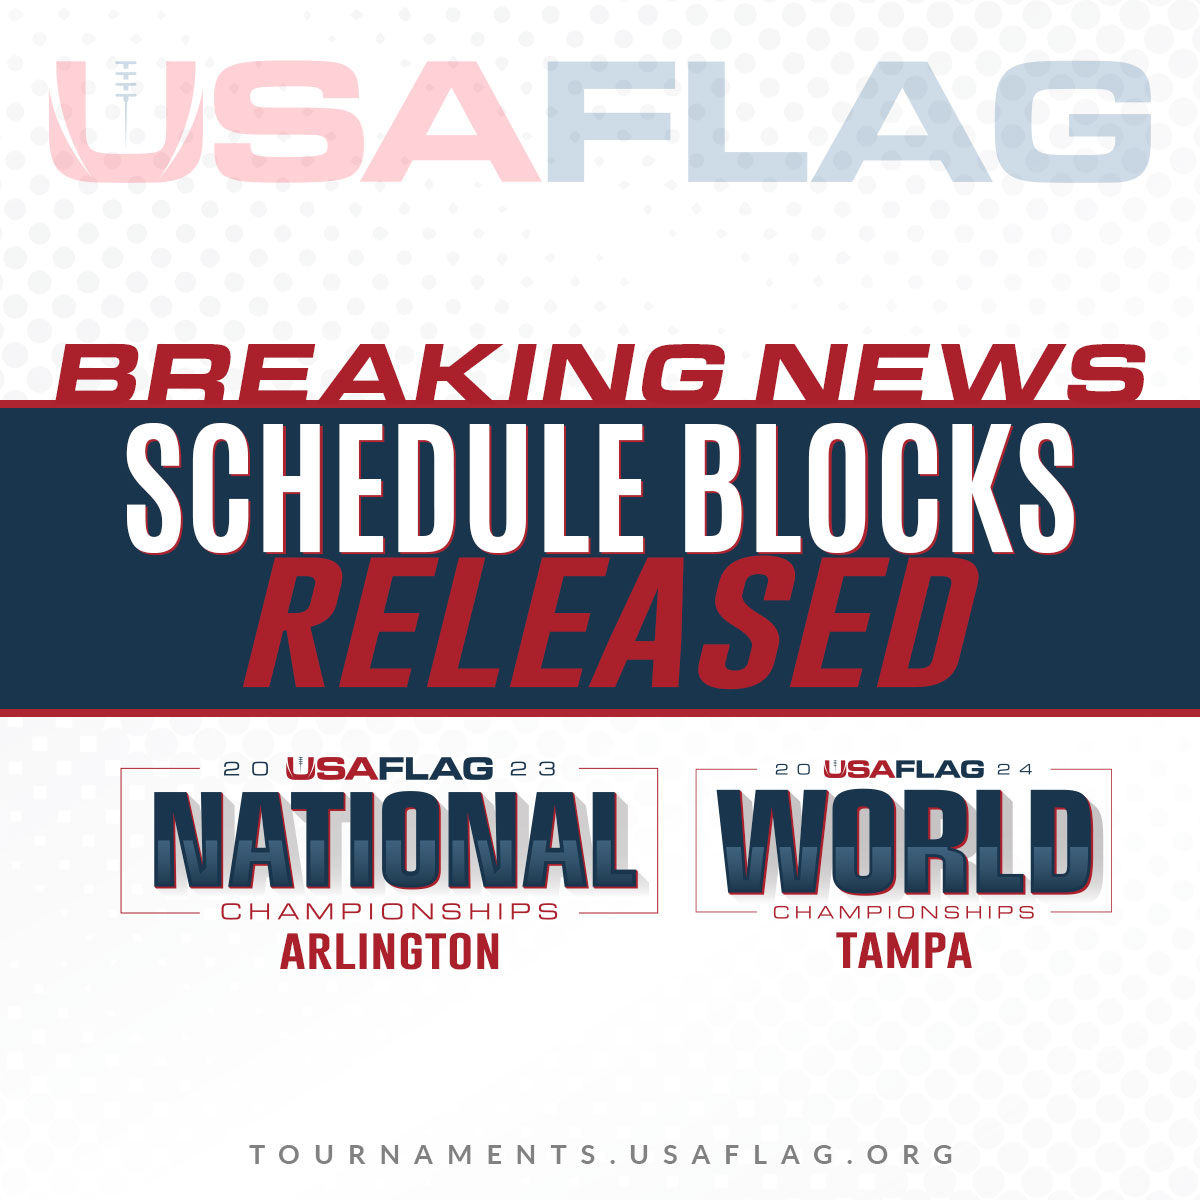 USA Flag - Schedule blocks and formats are up on the website